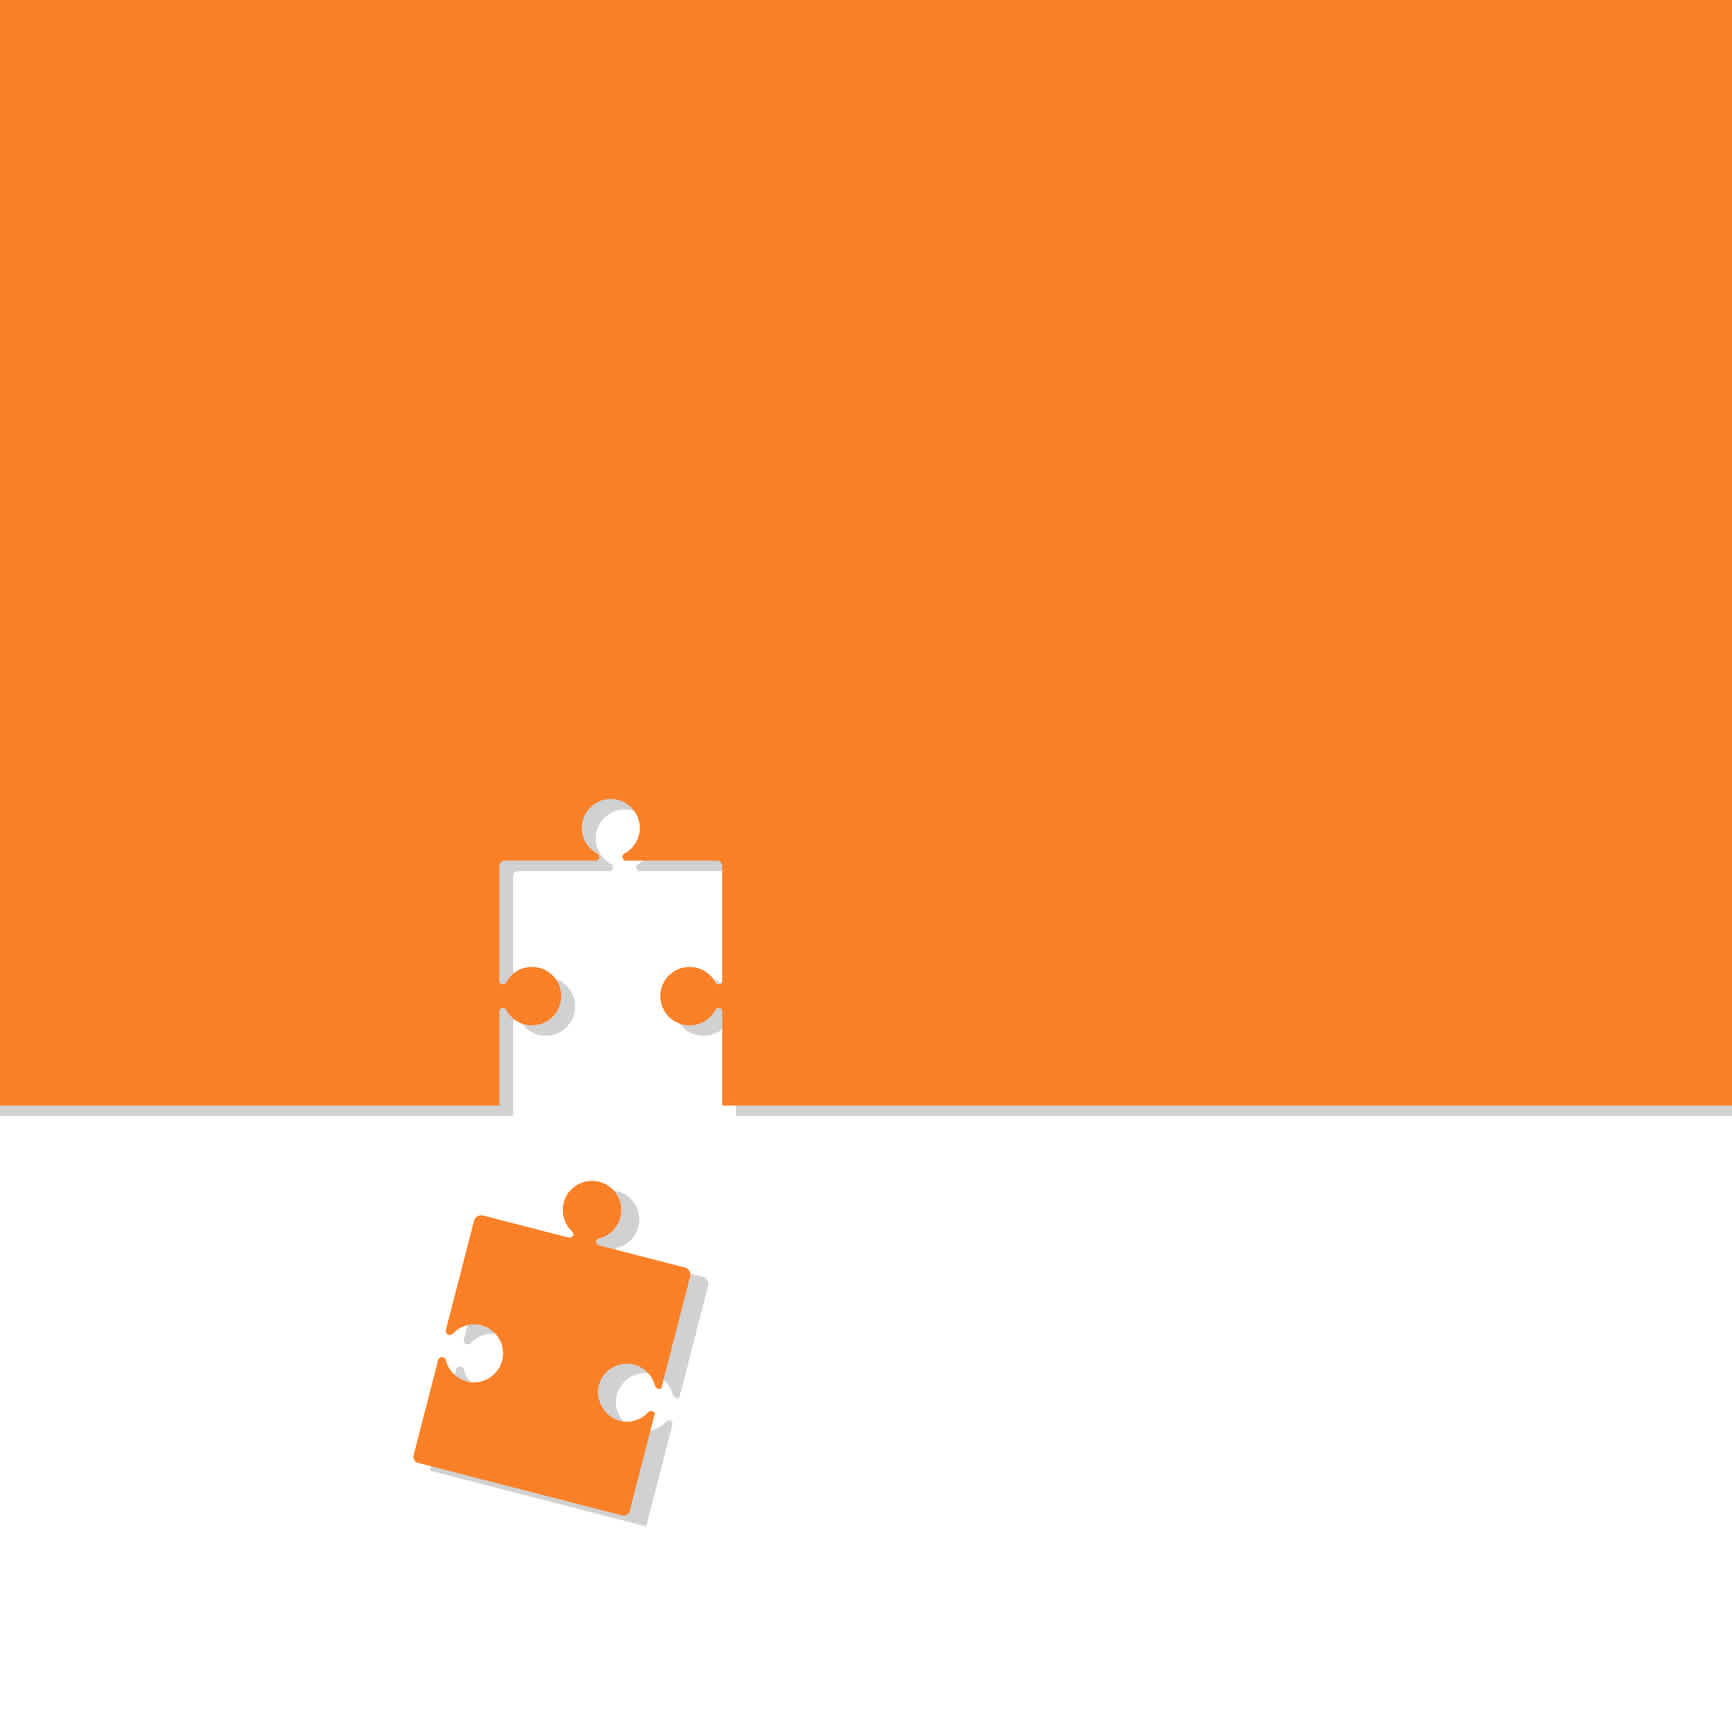 Orange and white background with a puzzle piece fitting to complete the orange section. To symbolize when to connect with your qualified leads in inbound lead generation. | Watermark